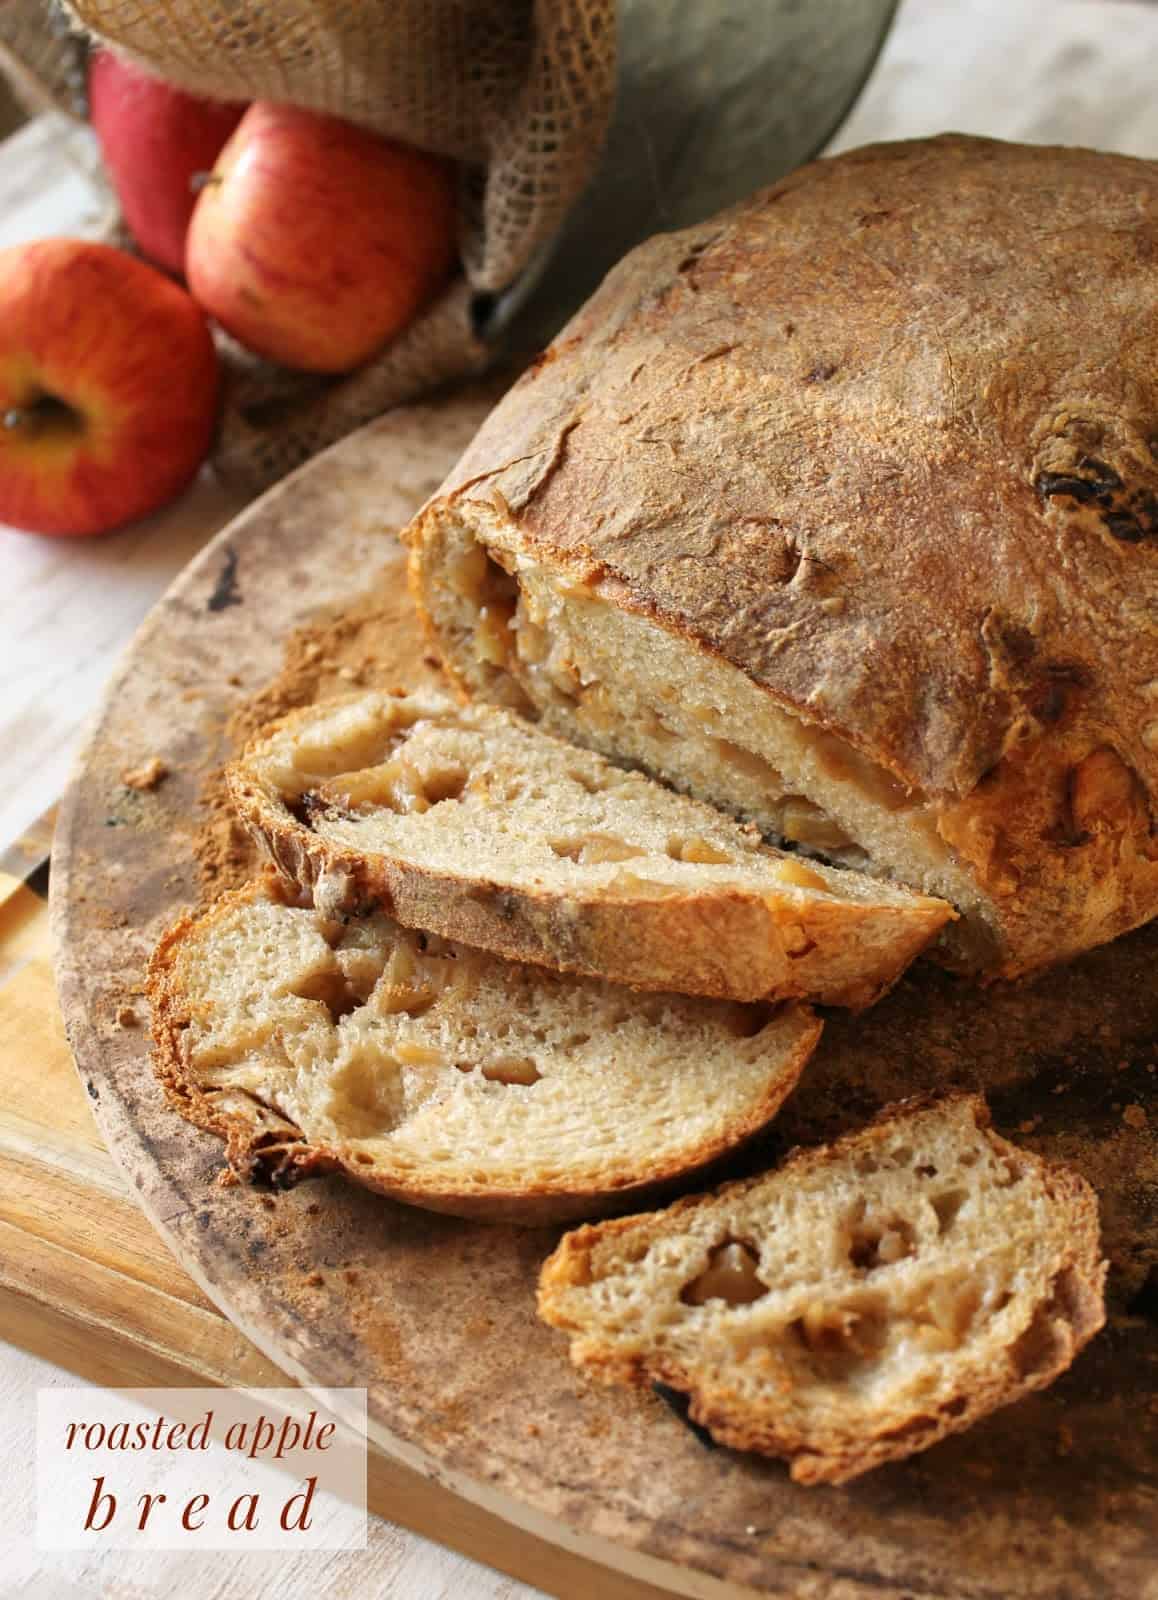 Roasted Apple Bread with Walnuts